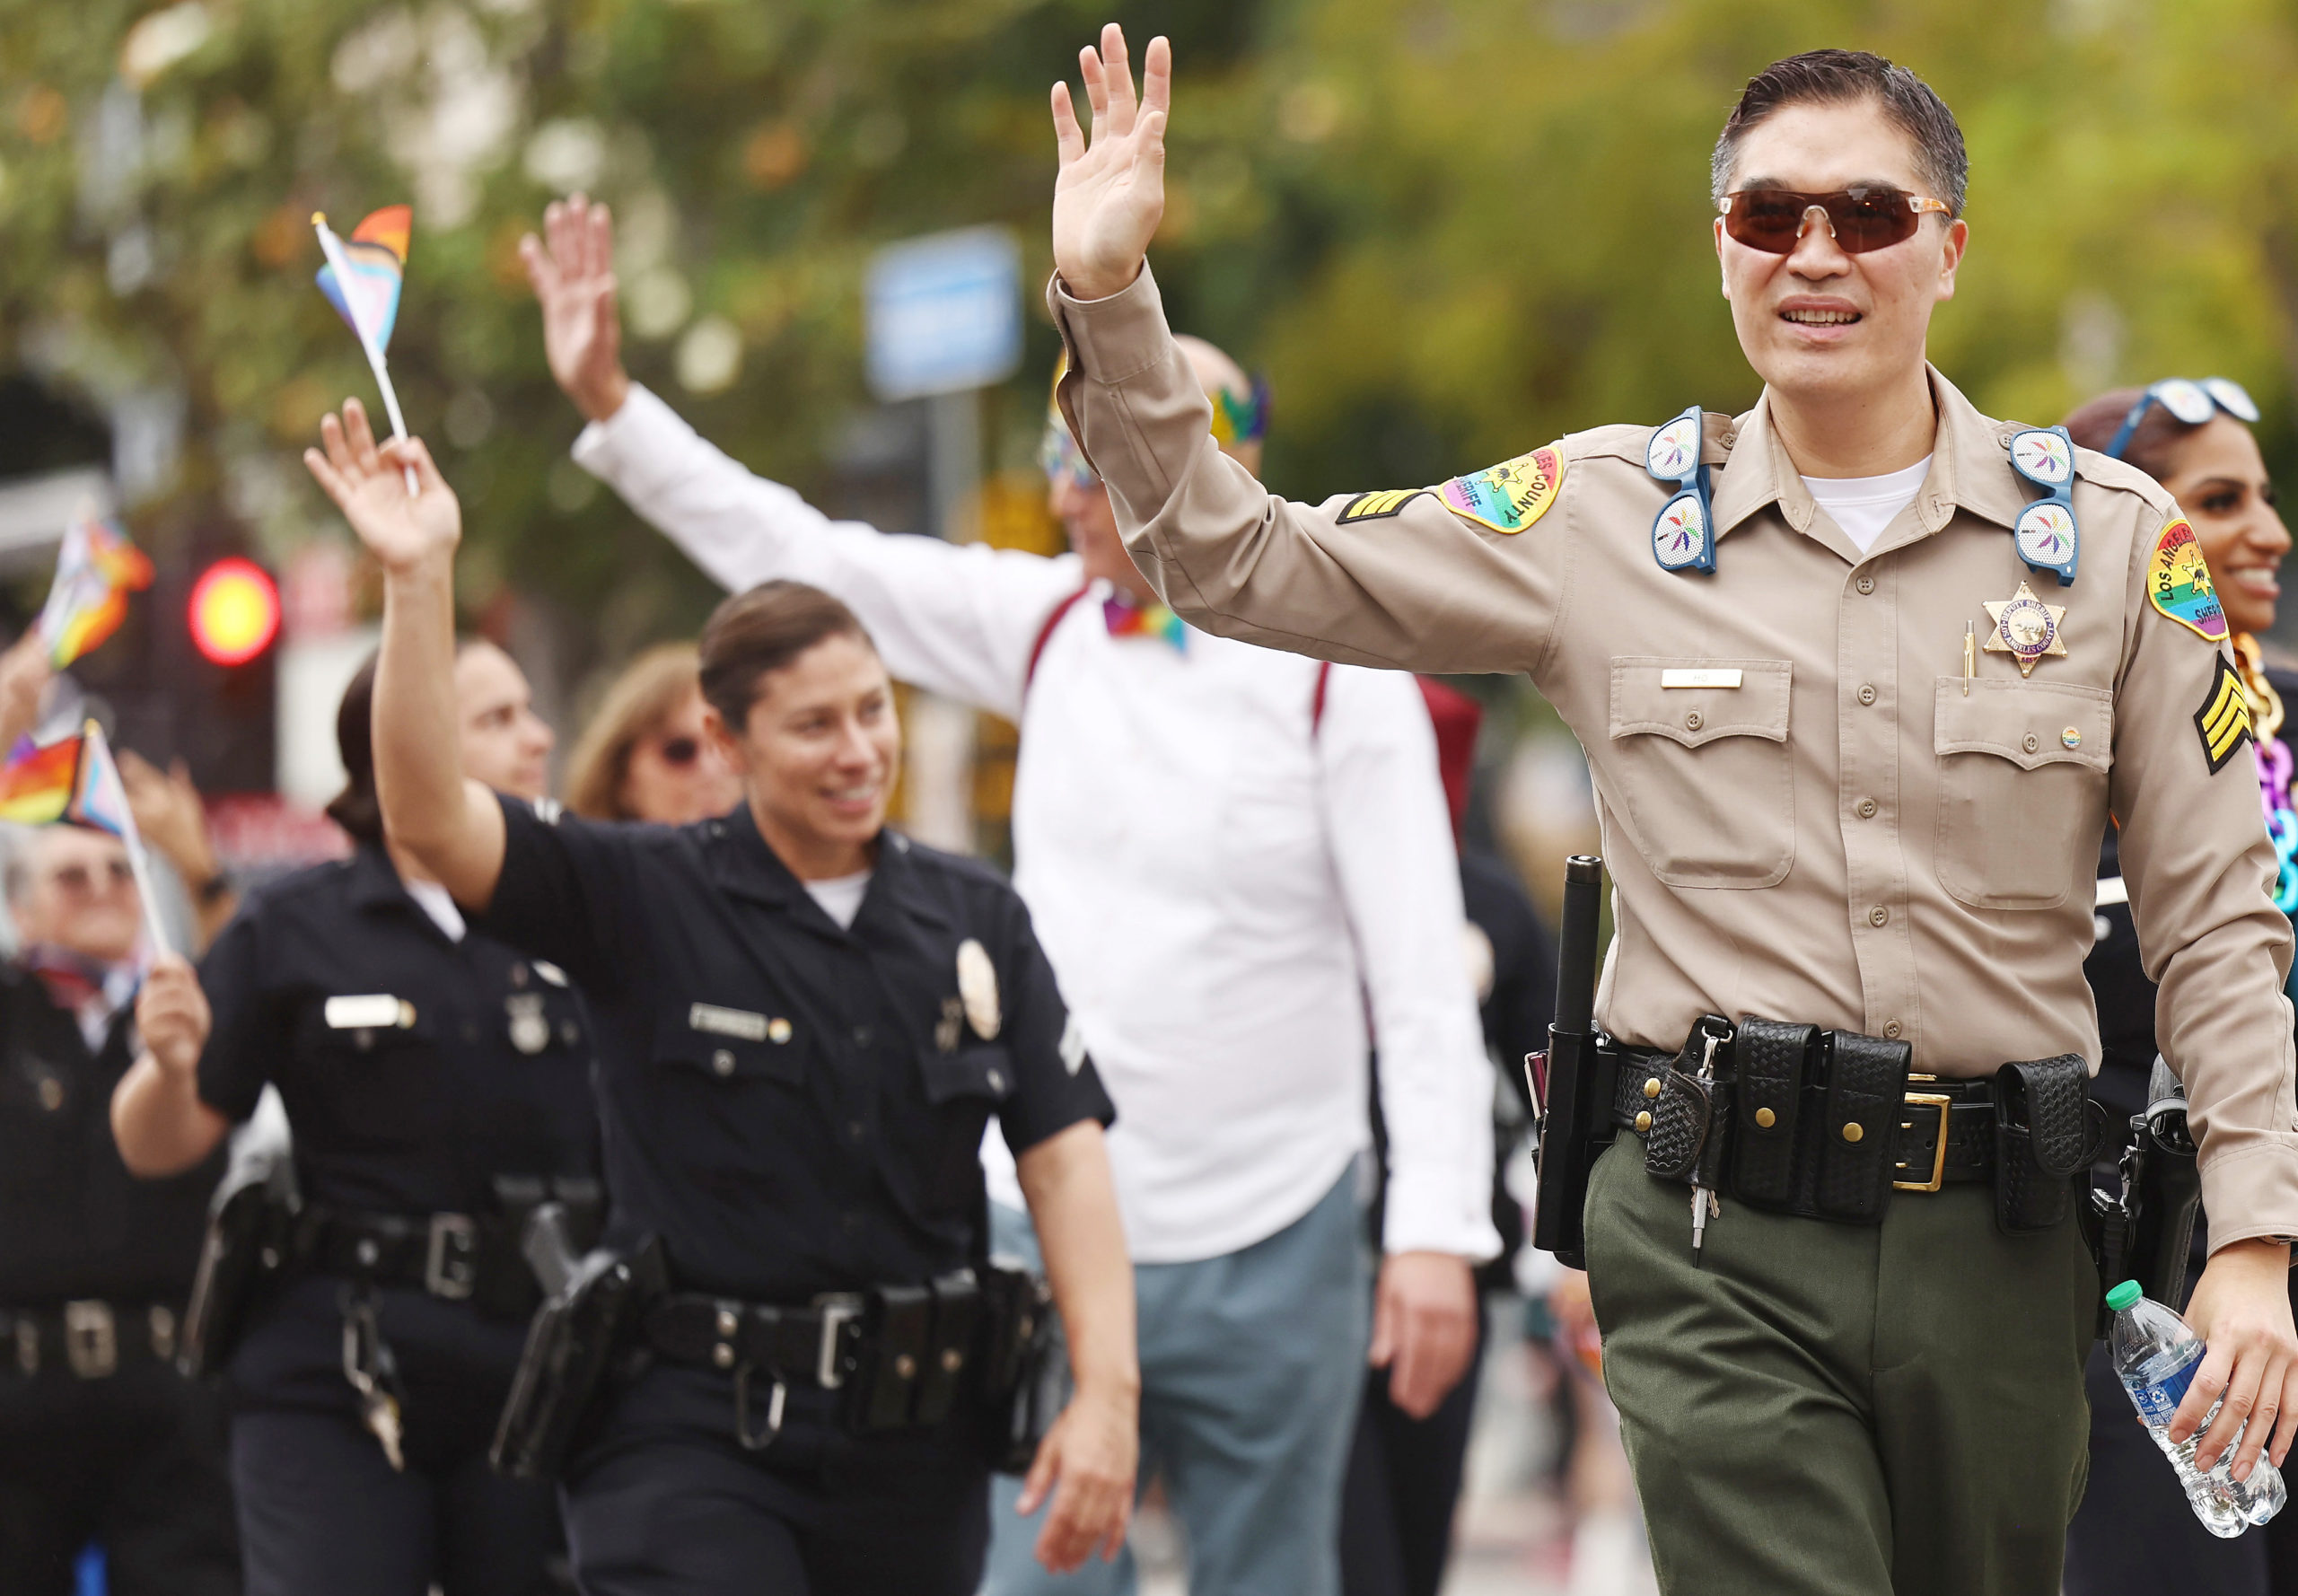 LOS ANGELES, CALIFORNIA - JUNE 11: Los Angeles police officers wave while participating in the 2023 LA Pride Parade in Hollywood on June 11, 2023 in Los Angeles, California. (Photo by Mario Tama/Getty Images)